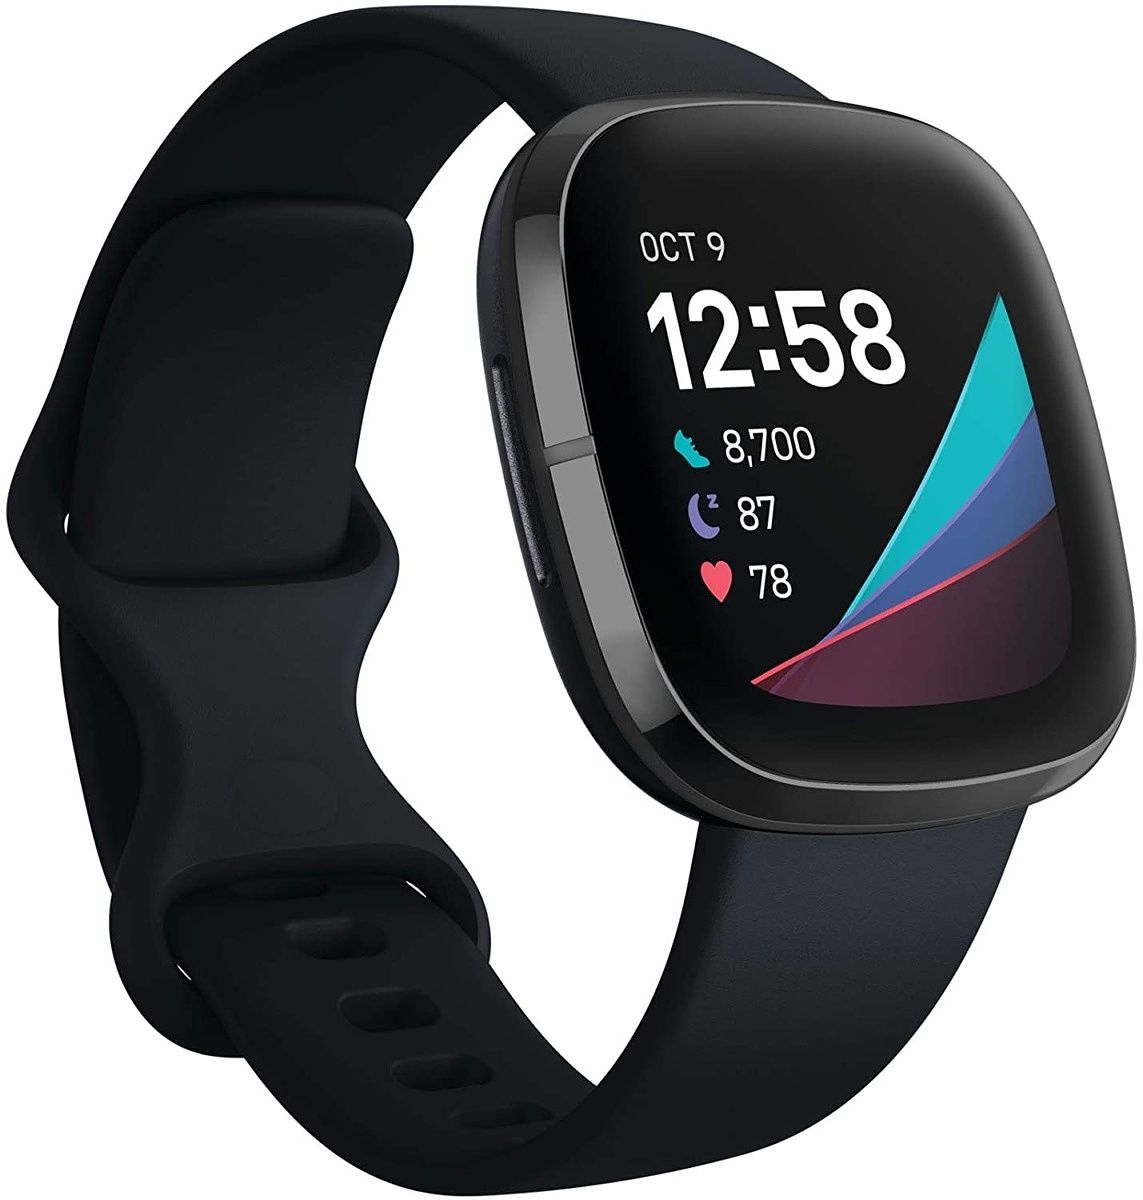 The Fitbit Sense is the company’s most advanced smartwatch yet. It comes a 1.58 inch AMOLED display and a ton of health-related sensors.